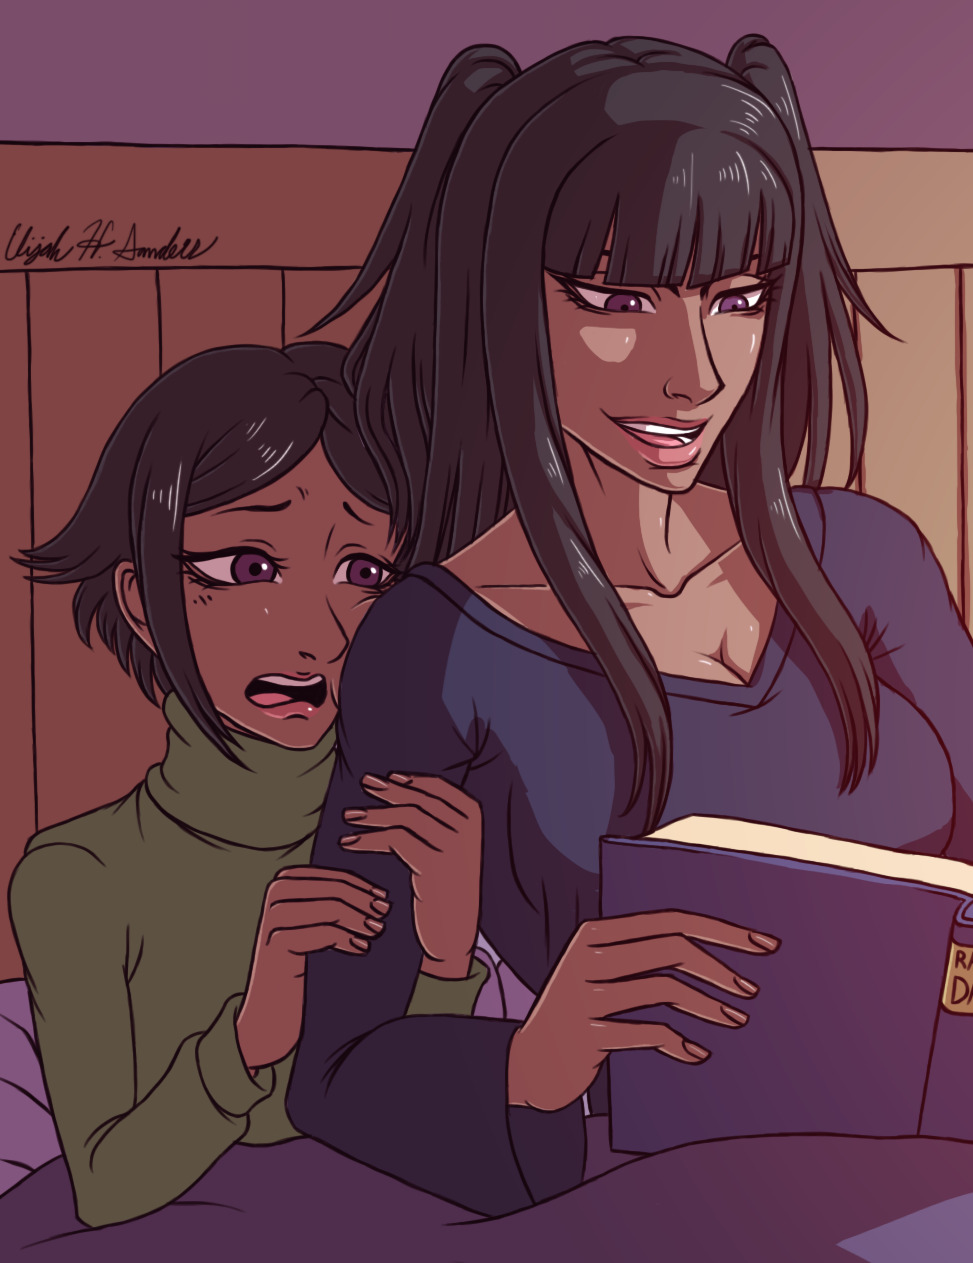 xmrnothingx: Noire and Tharja from Fire Emblem: Awakening I can’t believe I missed